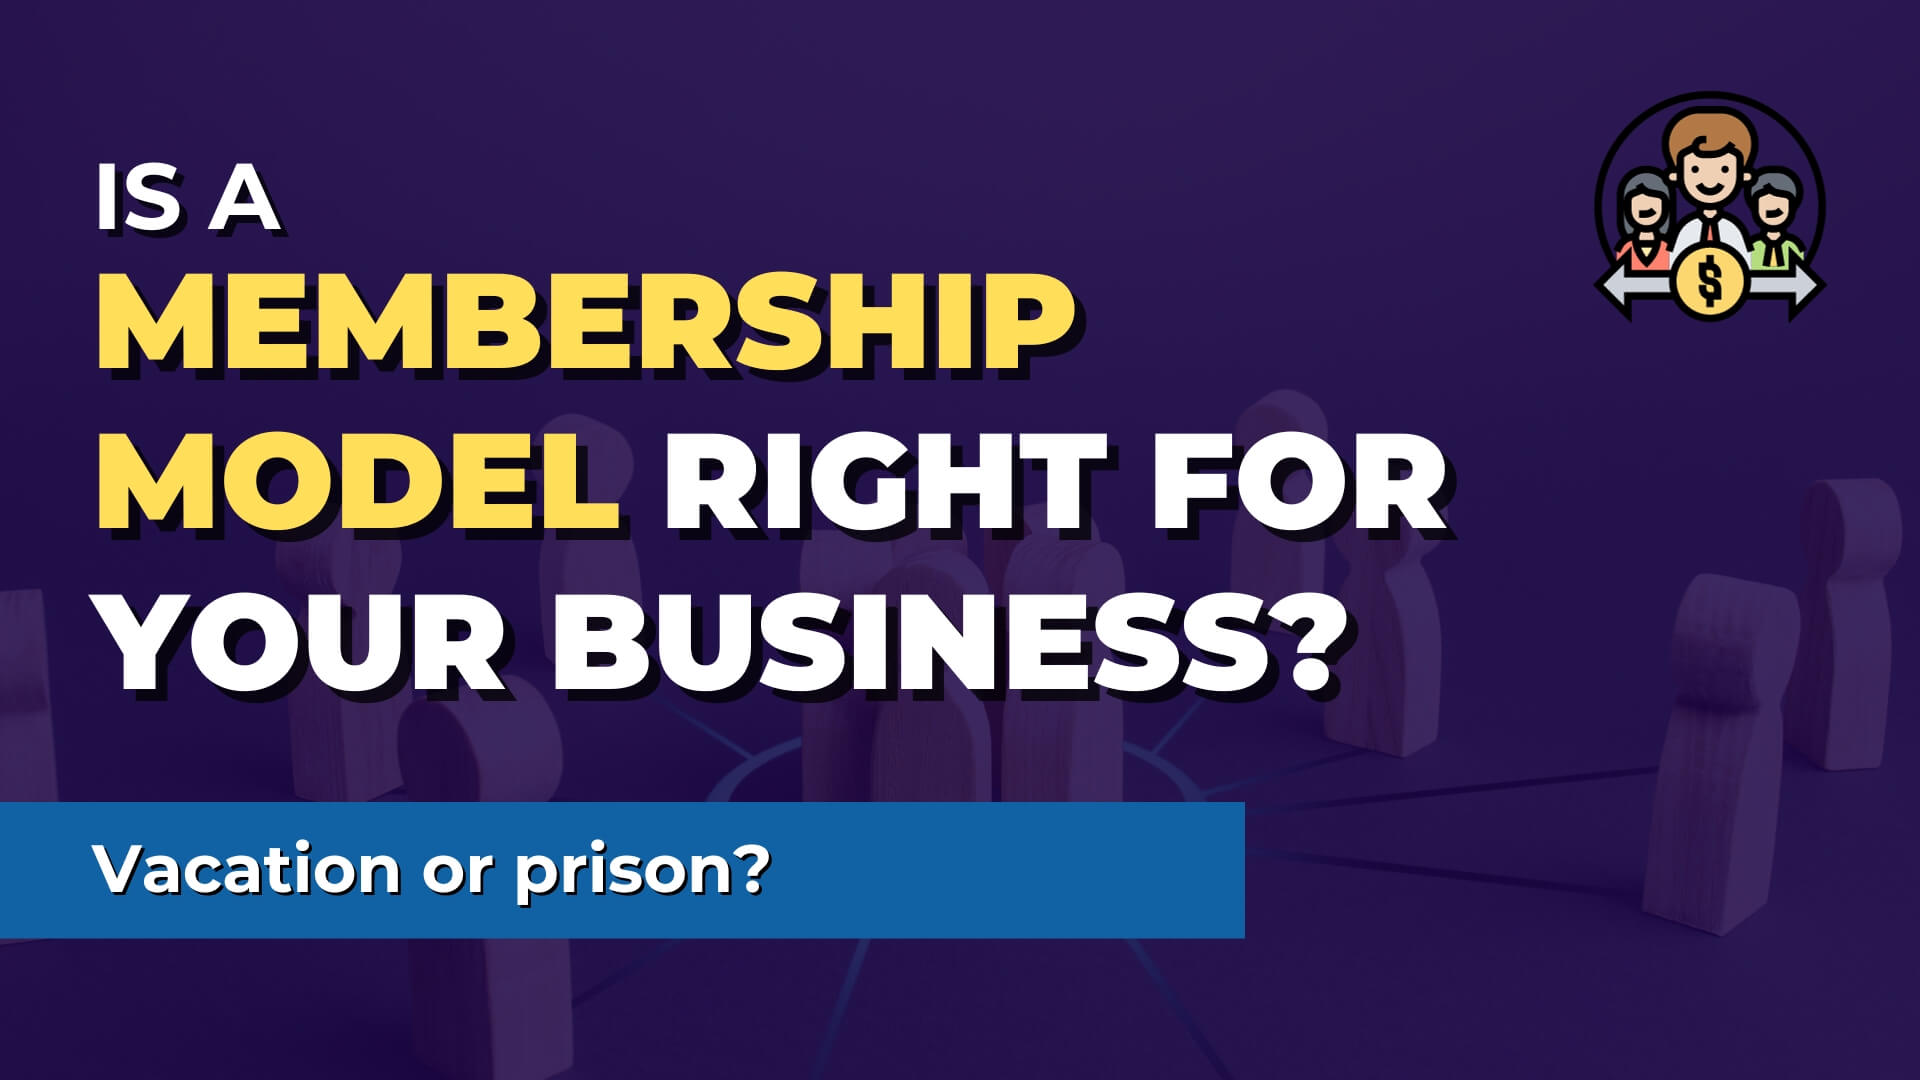 Image that says "Is A Membership Model Right For Your Business"